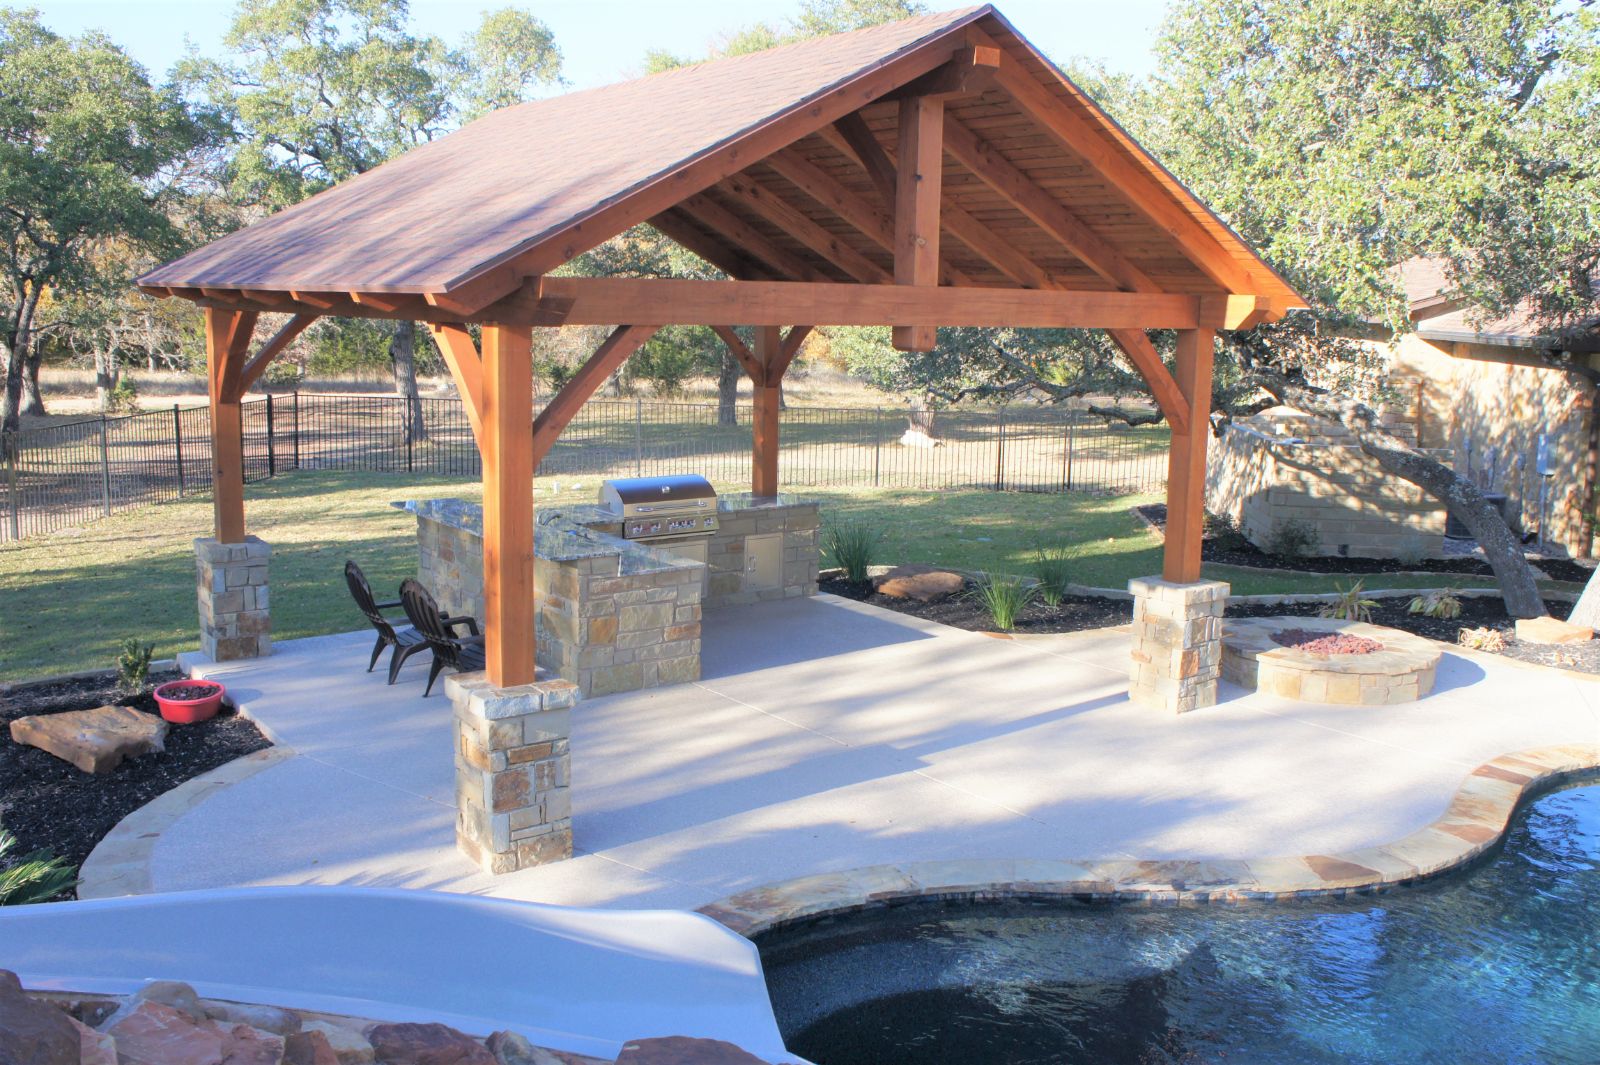 21x21, Heavy Timber, Cement or concrete pad, barbecue or grill, kitchen or outdoor kitchen, patio furniture, residential, cabana, outdoor living, entertaining, firepit or fireplace, pool house, Austin, dripping springs, free standing pavilion